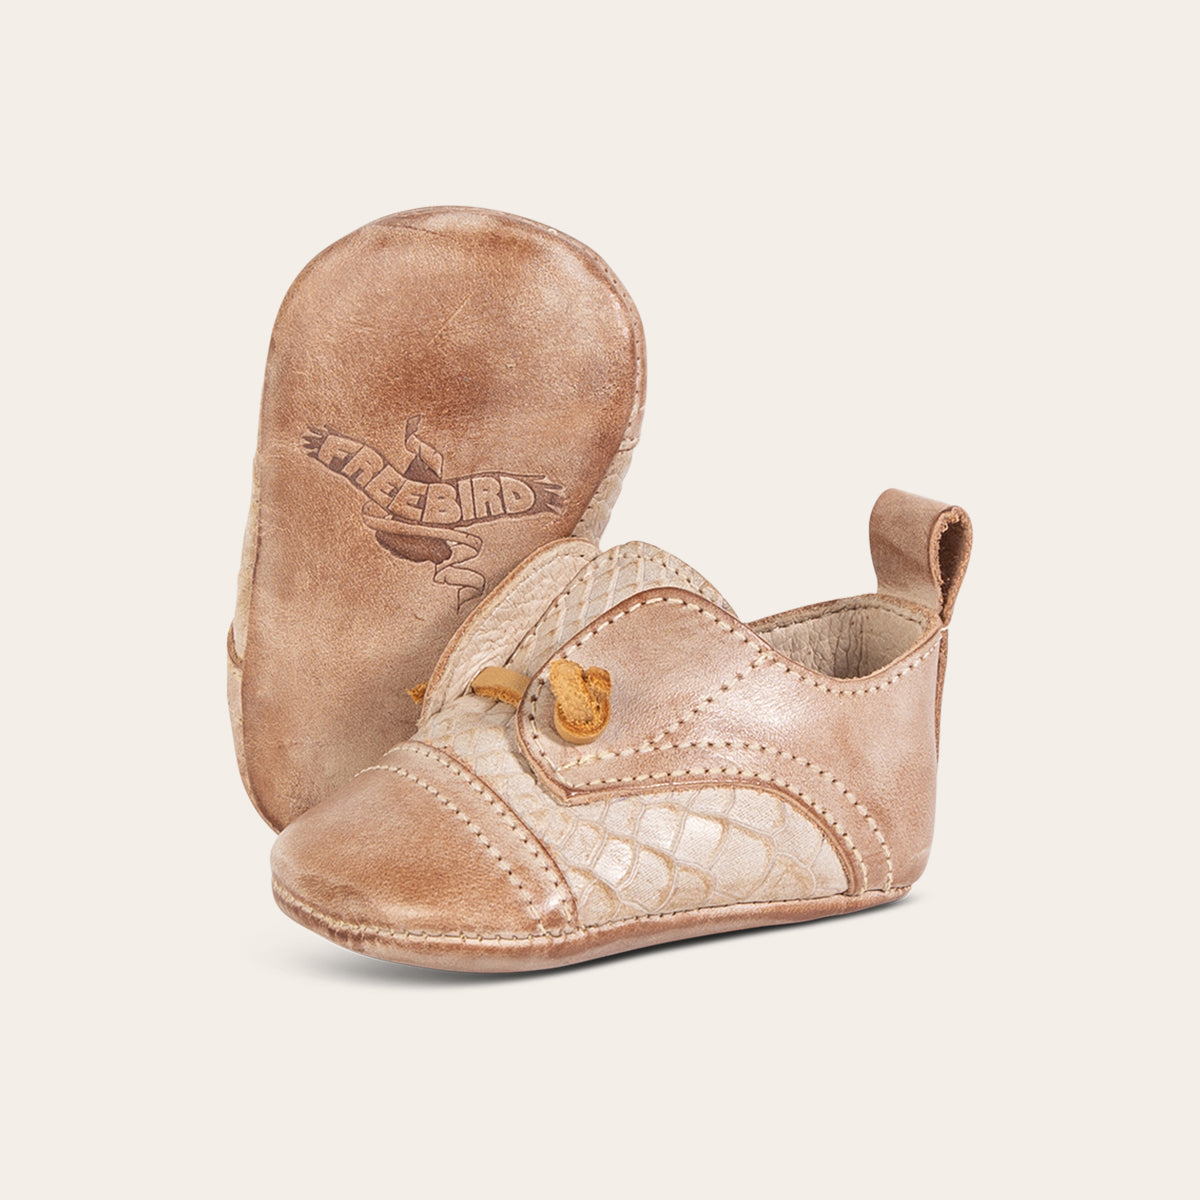 side view showing decorative knotted leather lace and soft leather imprinted sole on FREEBIRD infant baby mabel taupe leather shoe